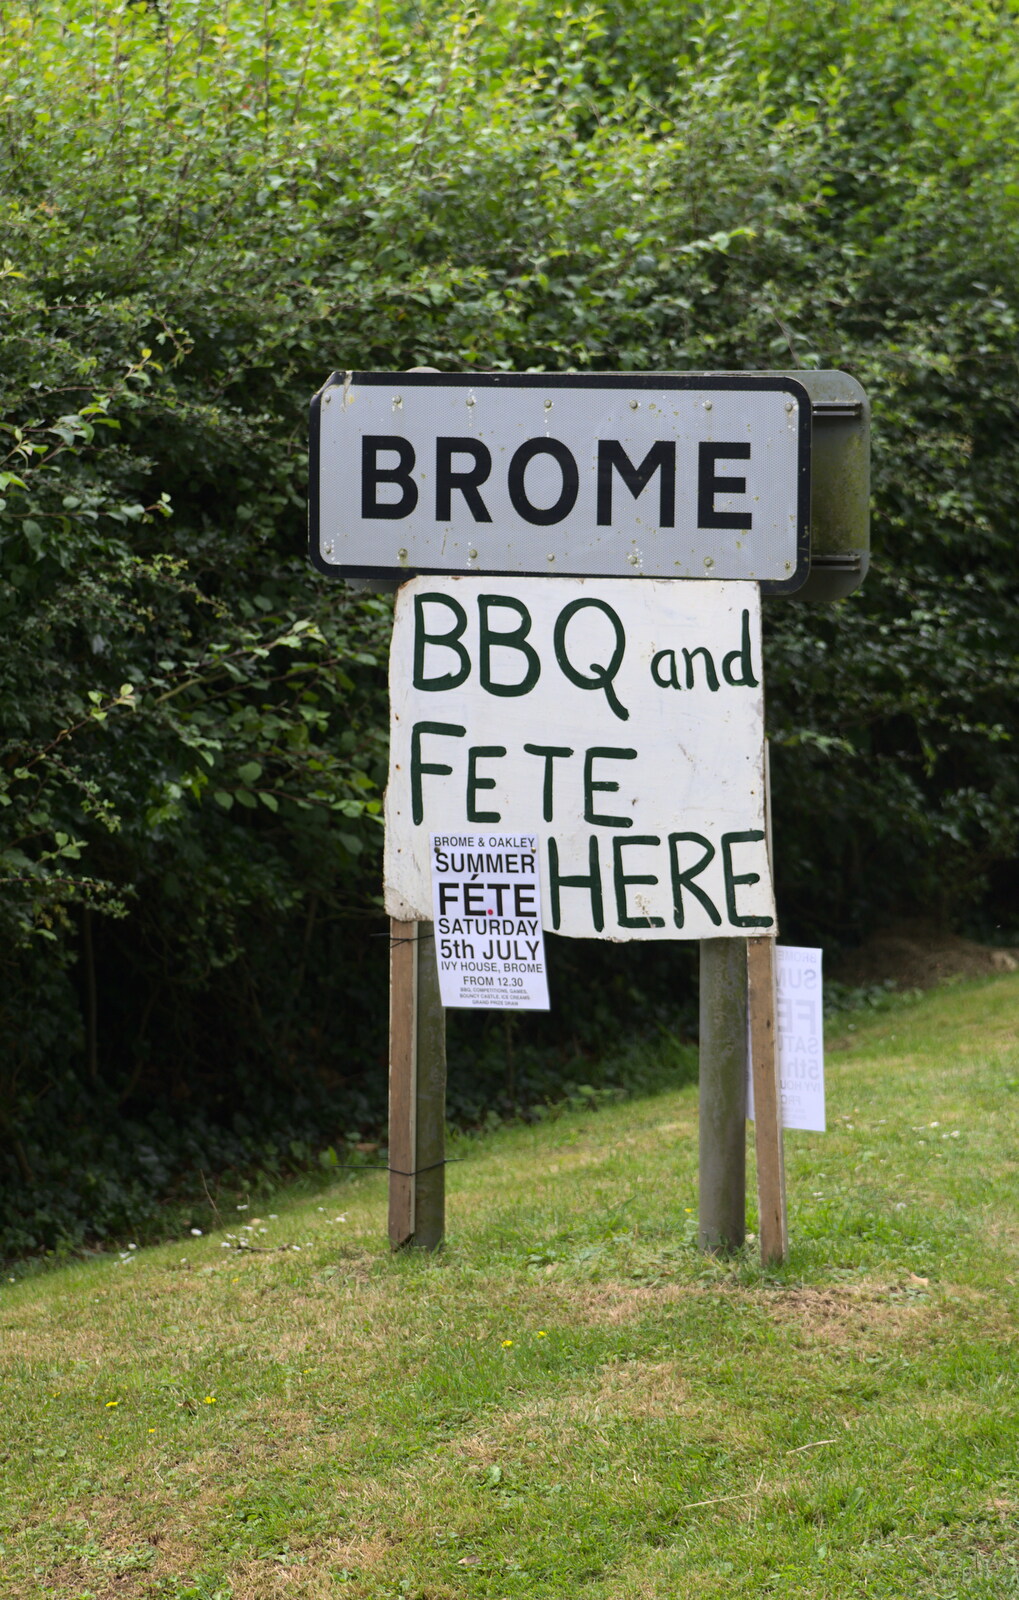 The Brome sign has been adjusted from The Village Summer Fête, Brome, Suffolk - 5th July 2014